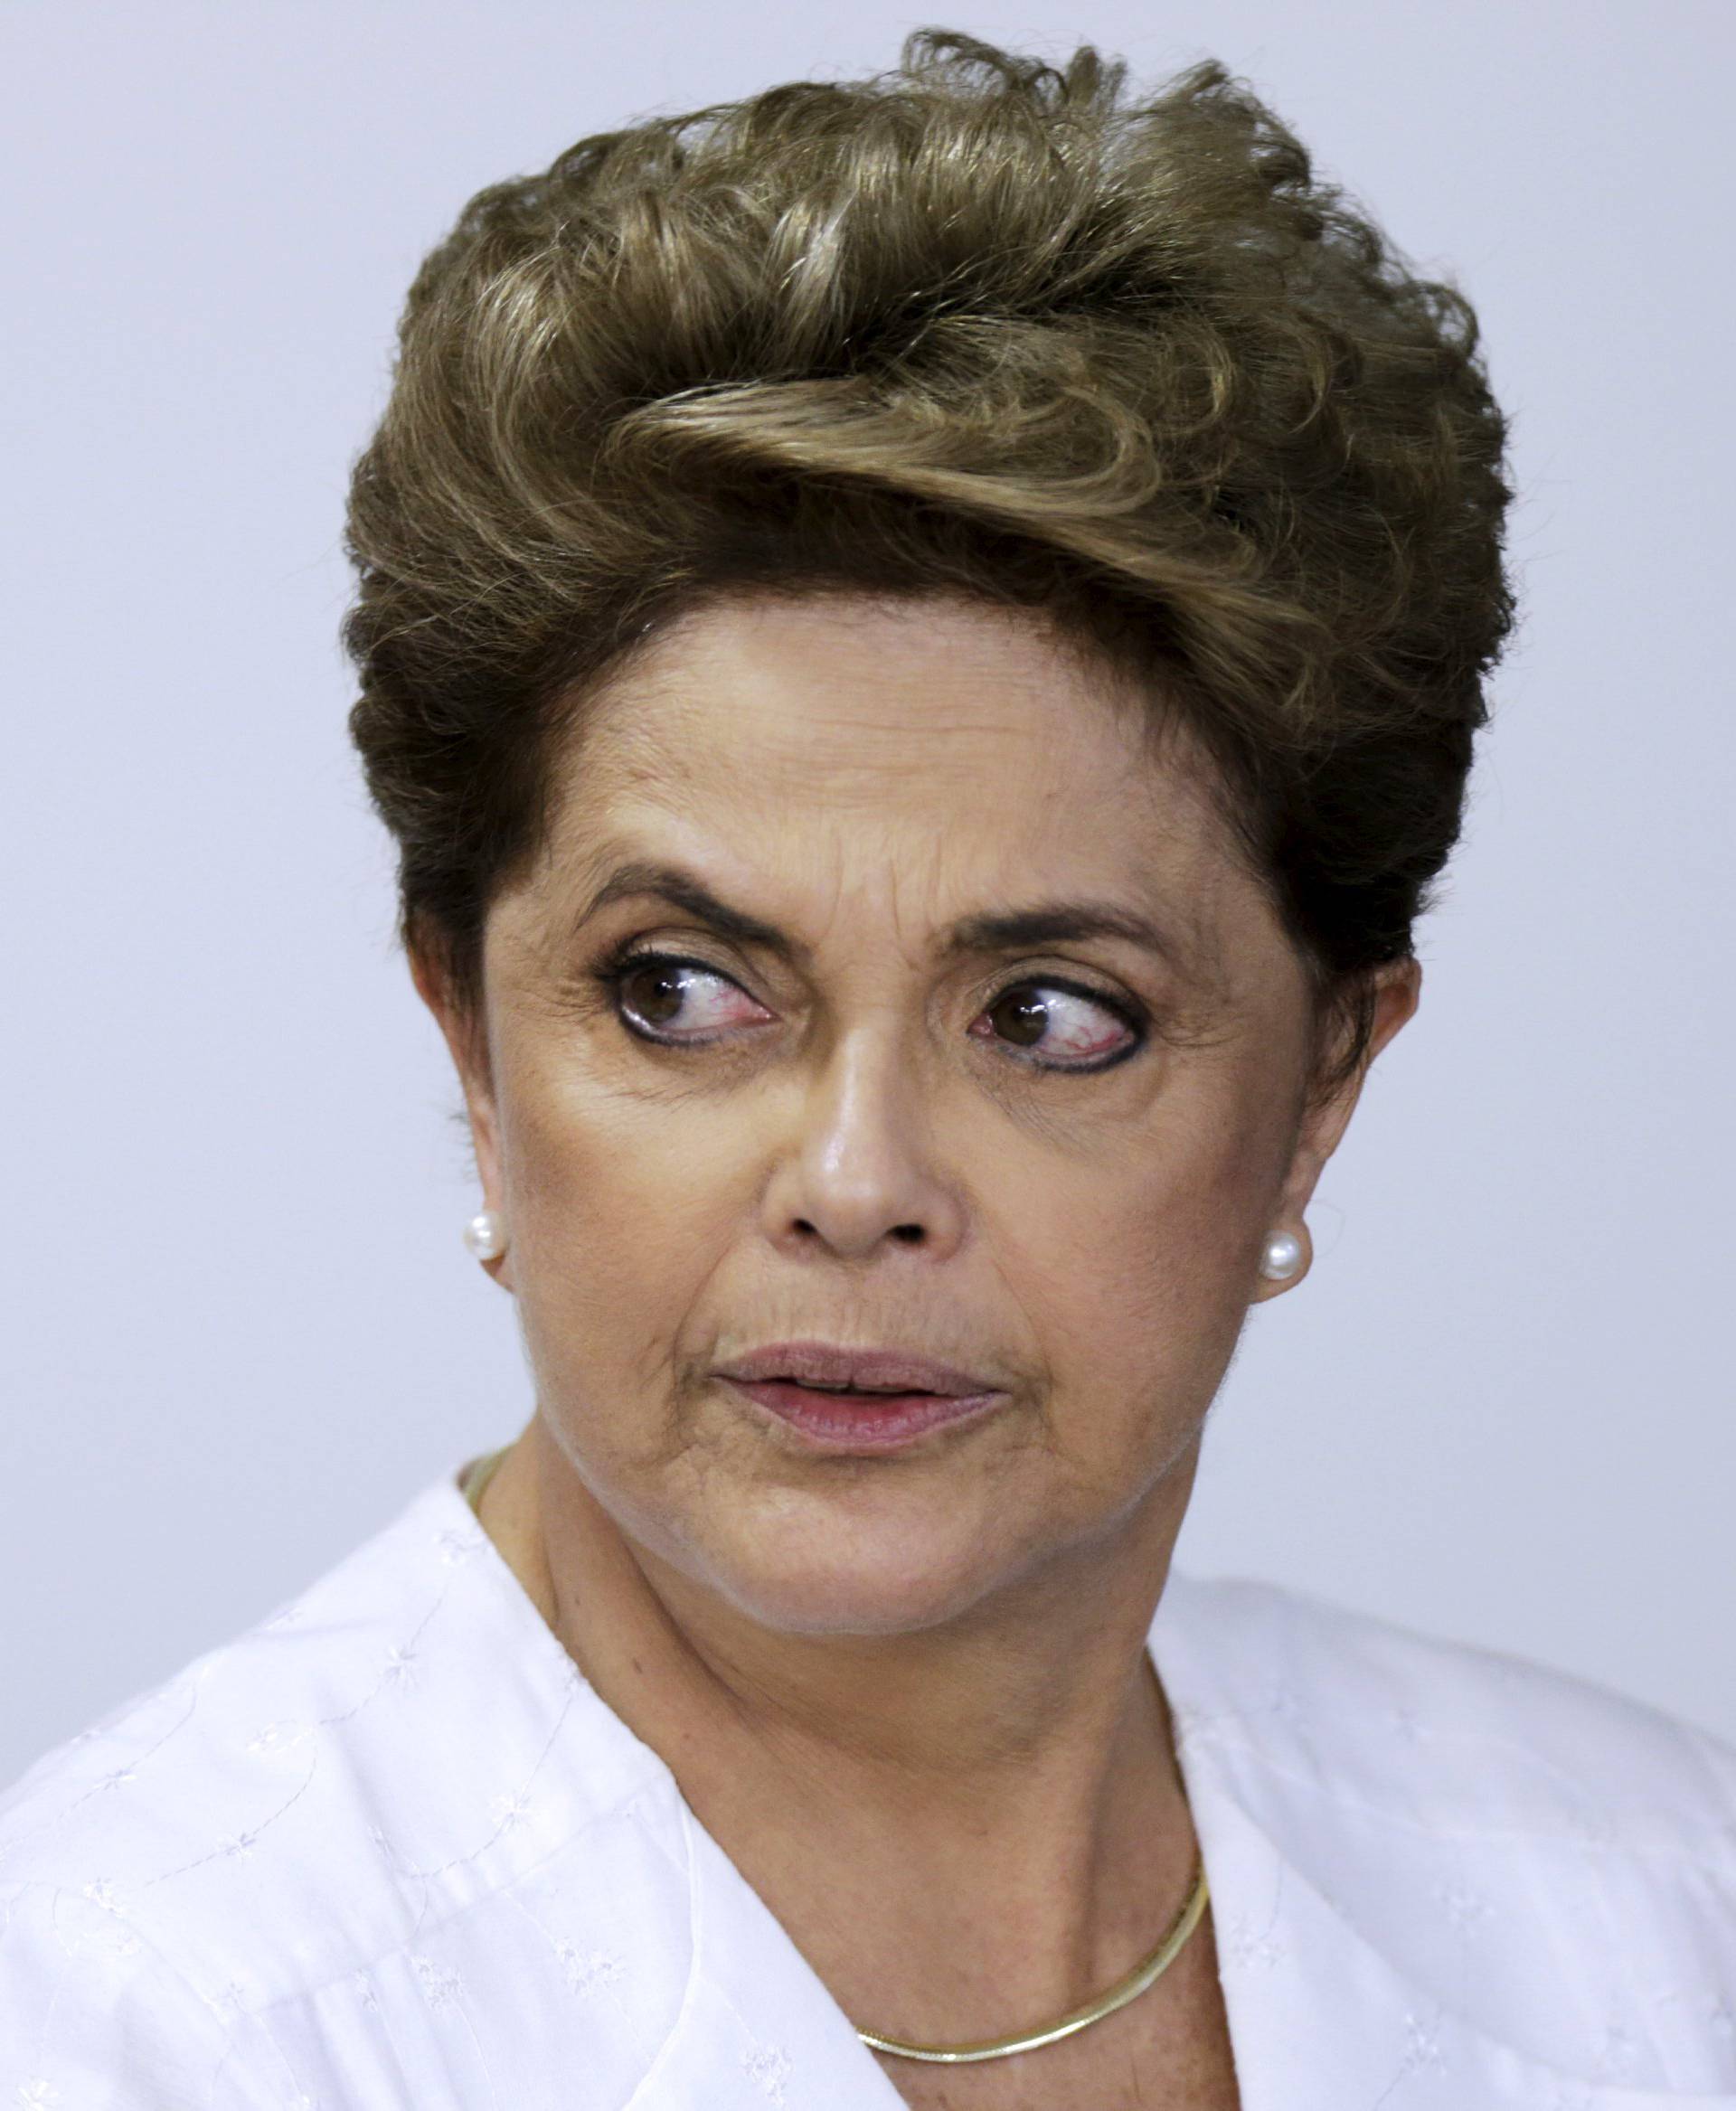 Brazil's President Rousseff looks on during signing of federal land transfer agreement for the government of the state of Amapa at Planalto Palace in Brasilia